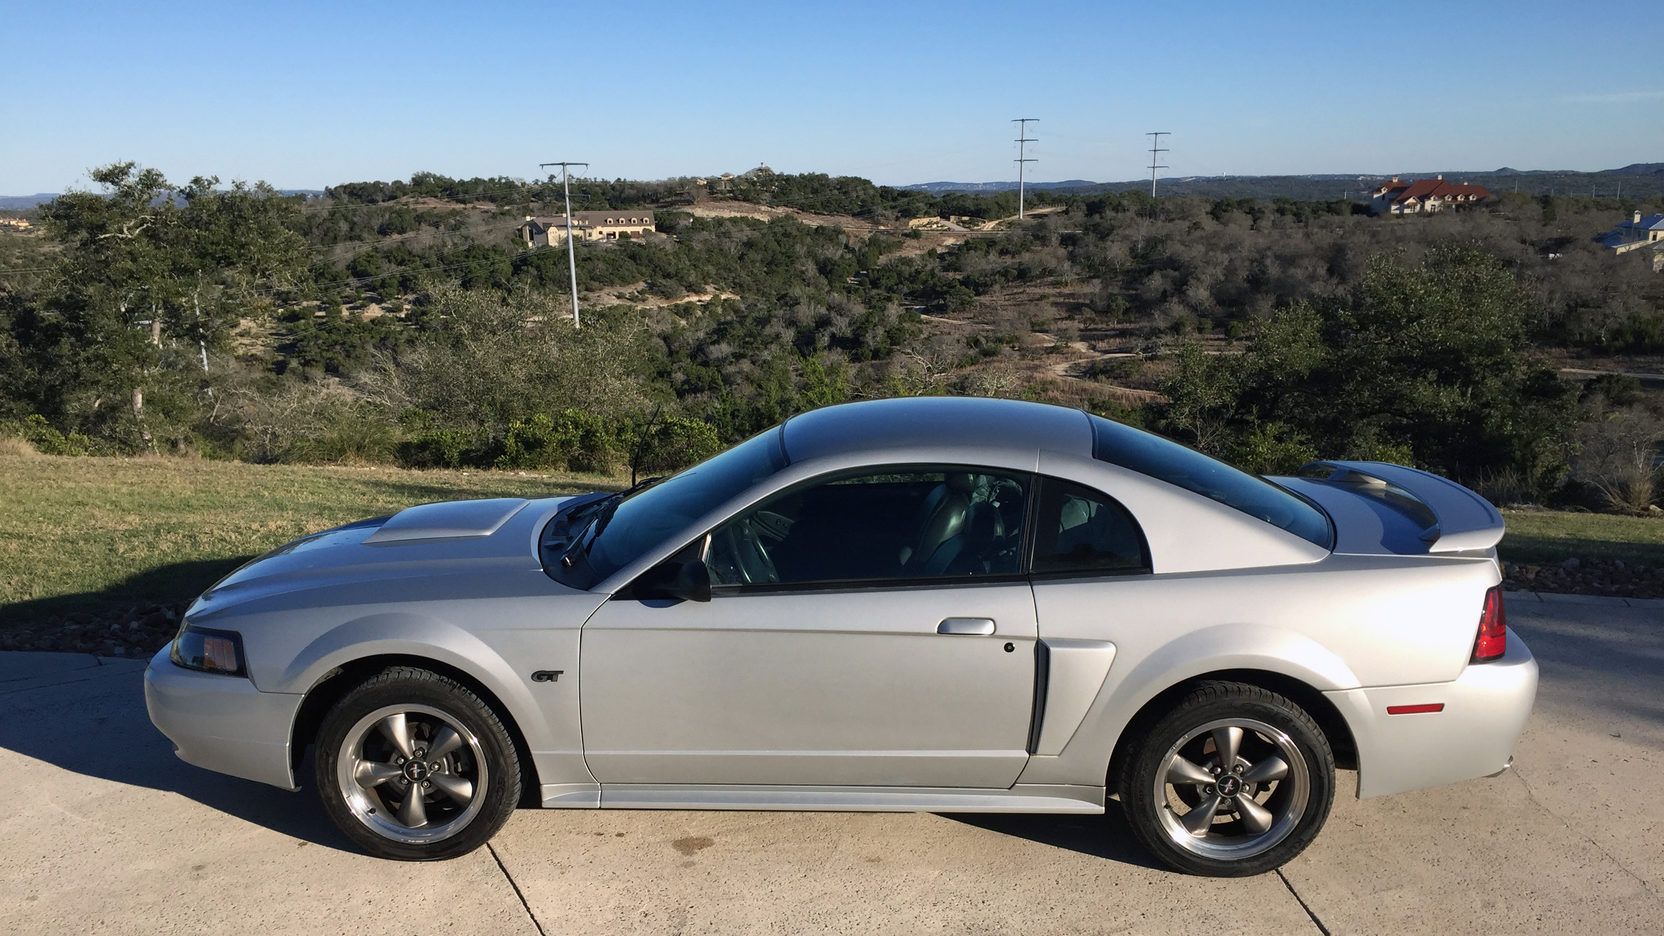 2000 Ford Mustang GT: The muscle car that could be a sports car.